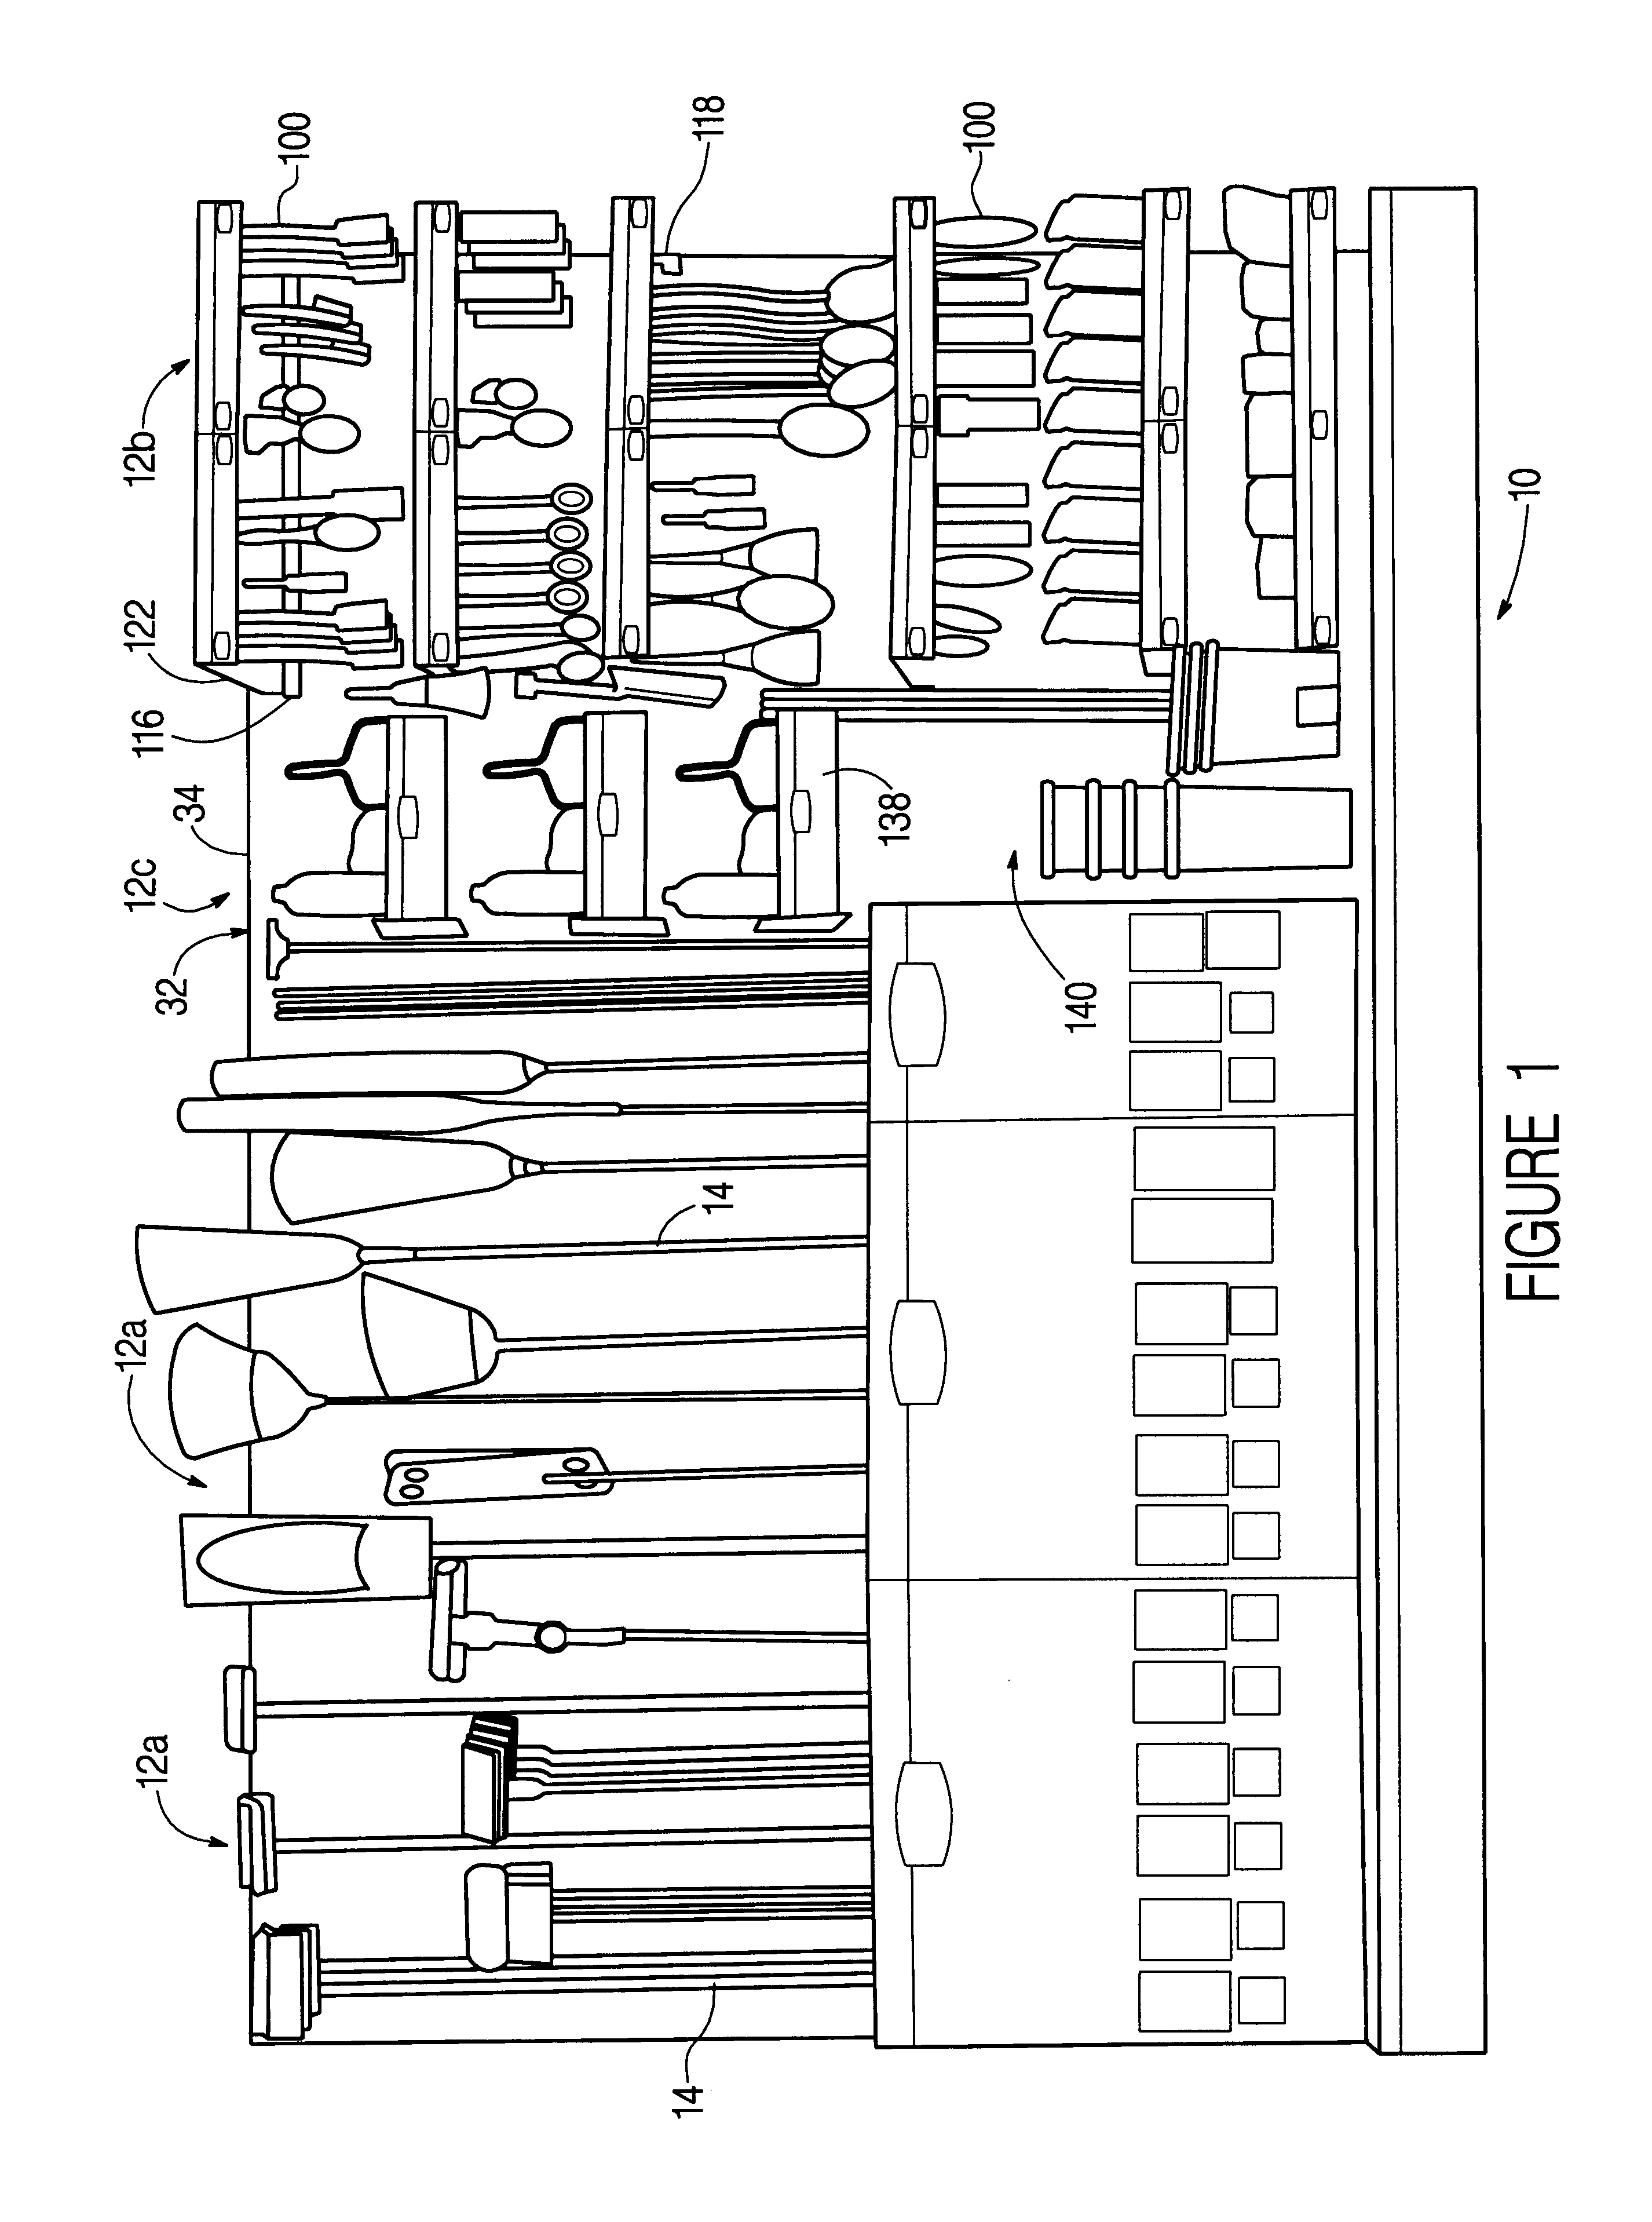 Apparatus and method of merchandising products